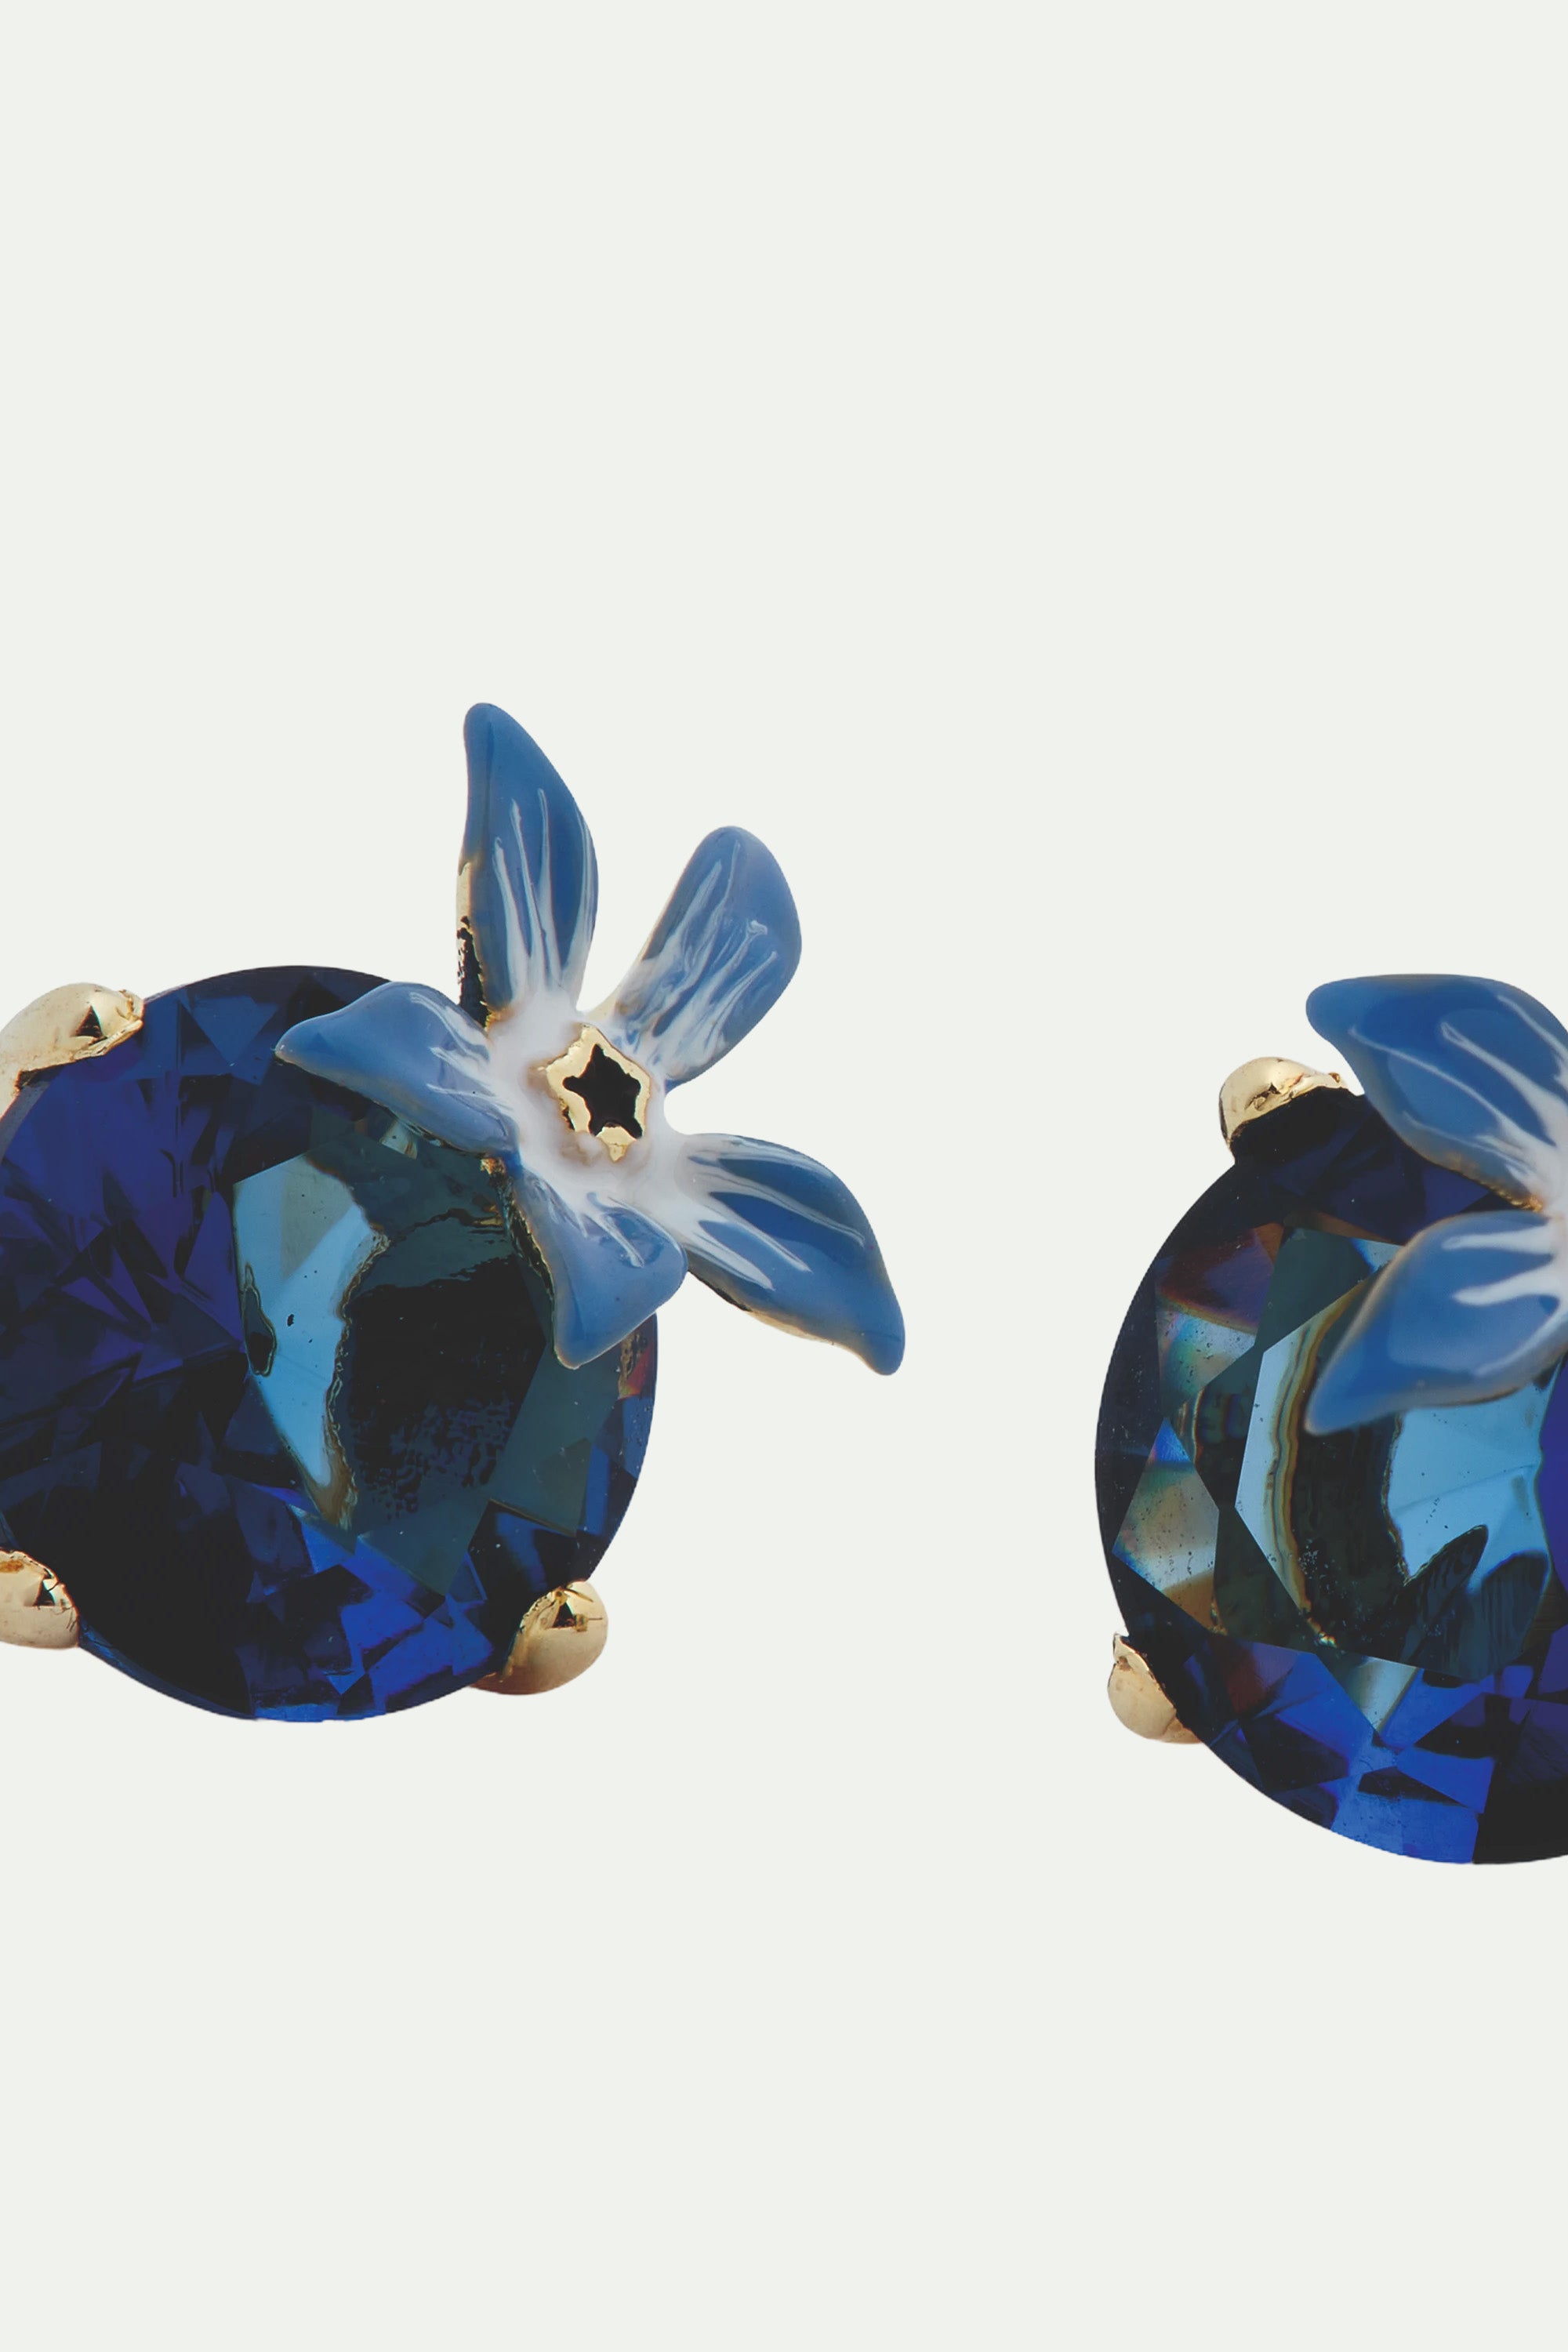 Blue flower and round stone post earrings